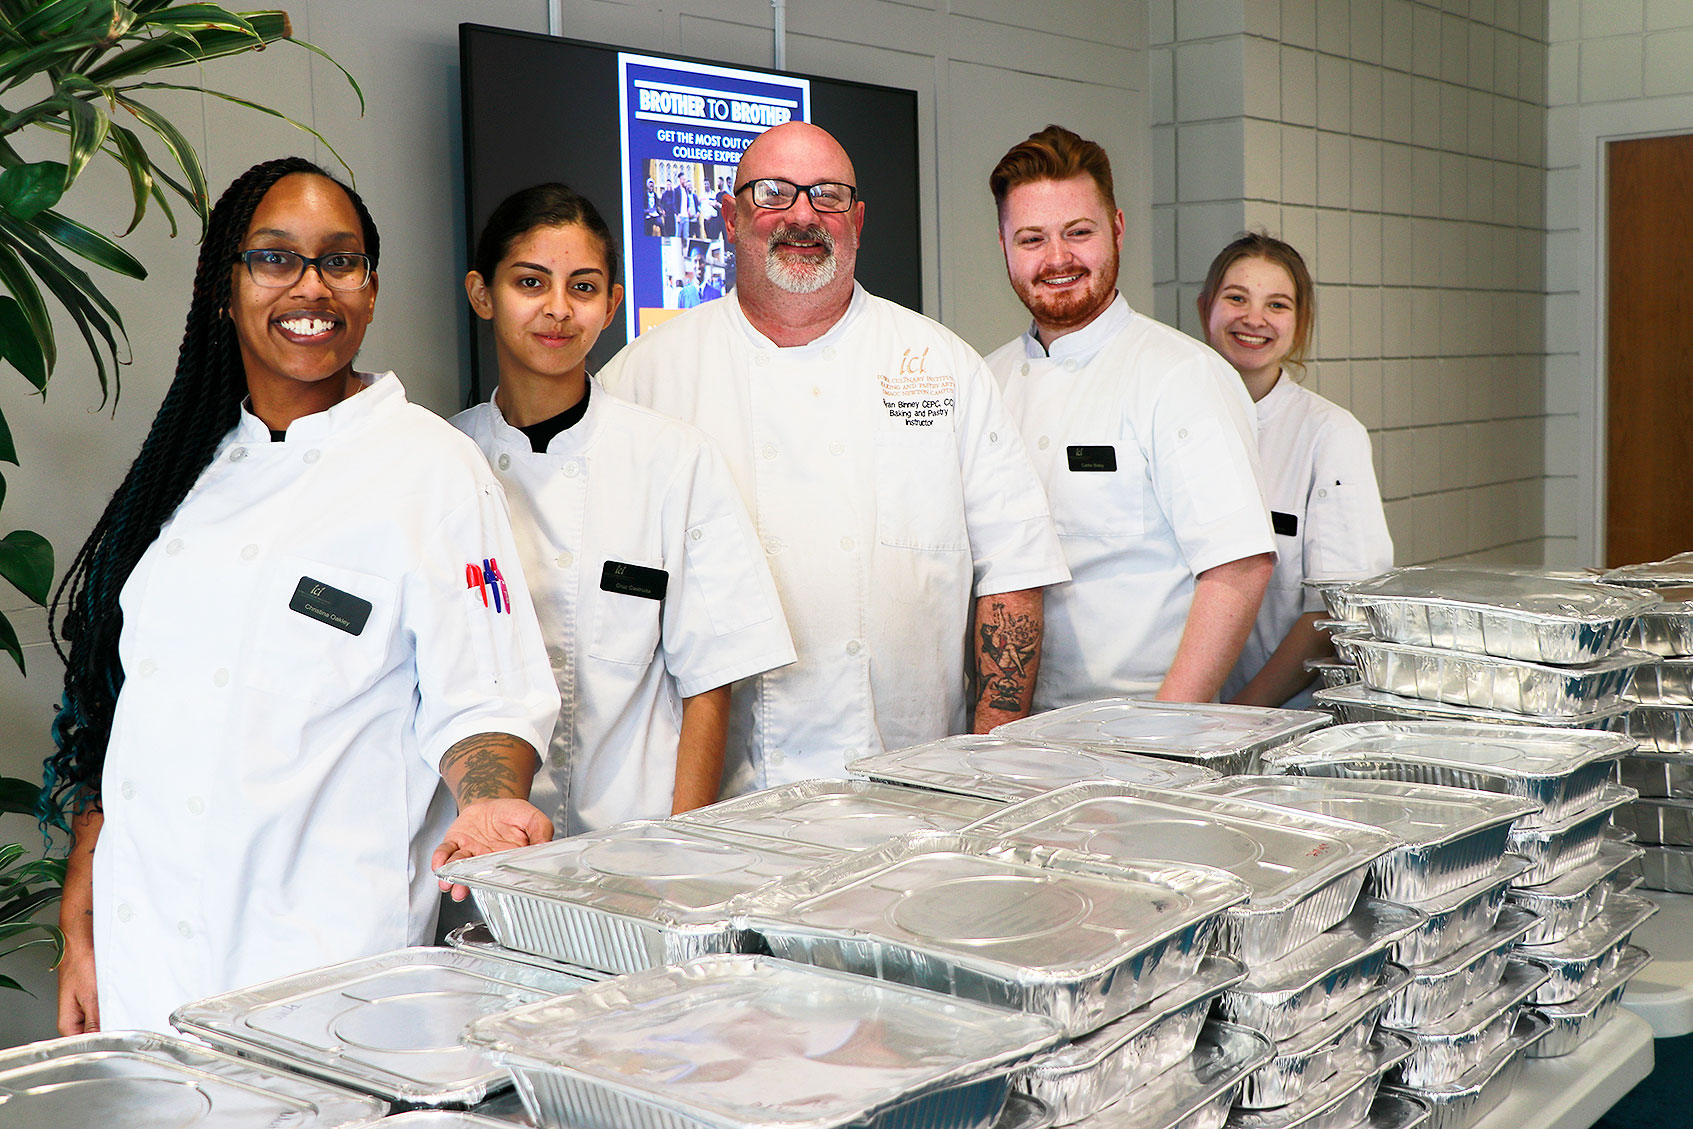 Students prepared approximately 700 dozen – or 8,400 individual –​ dinner rolls to fill customer orders this Thanksgiving.